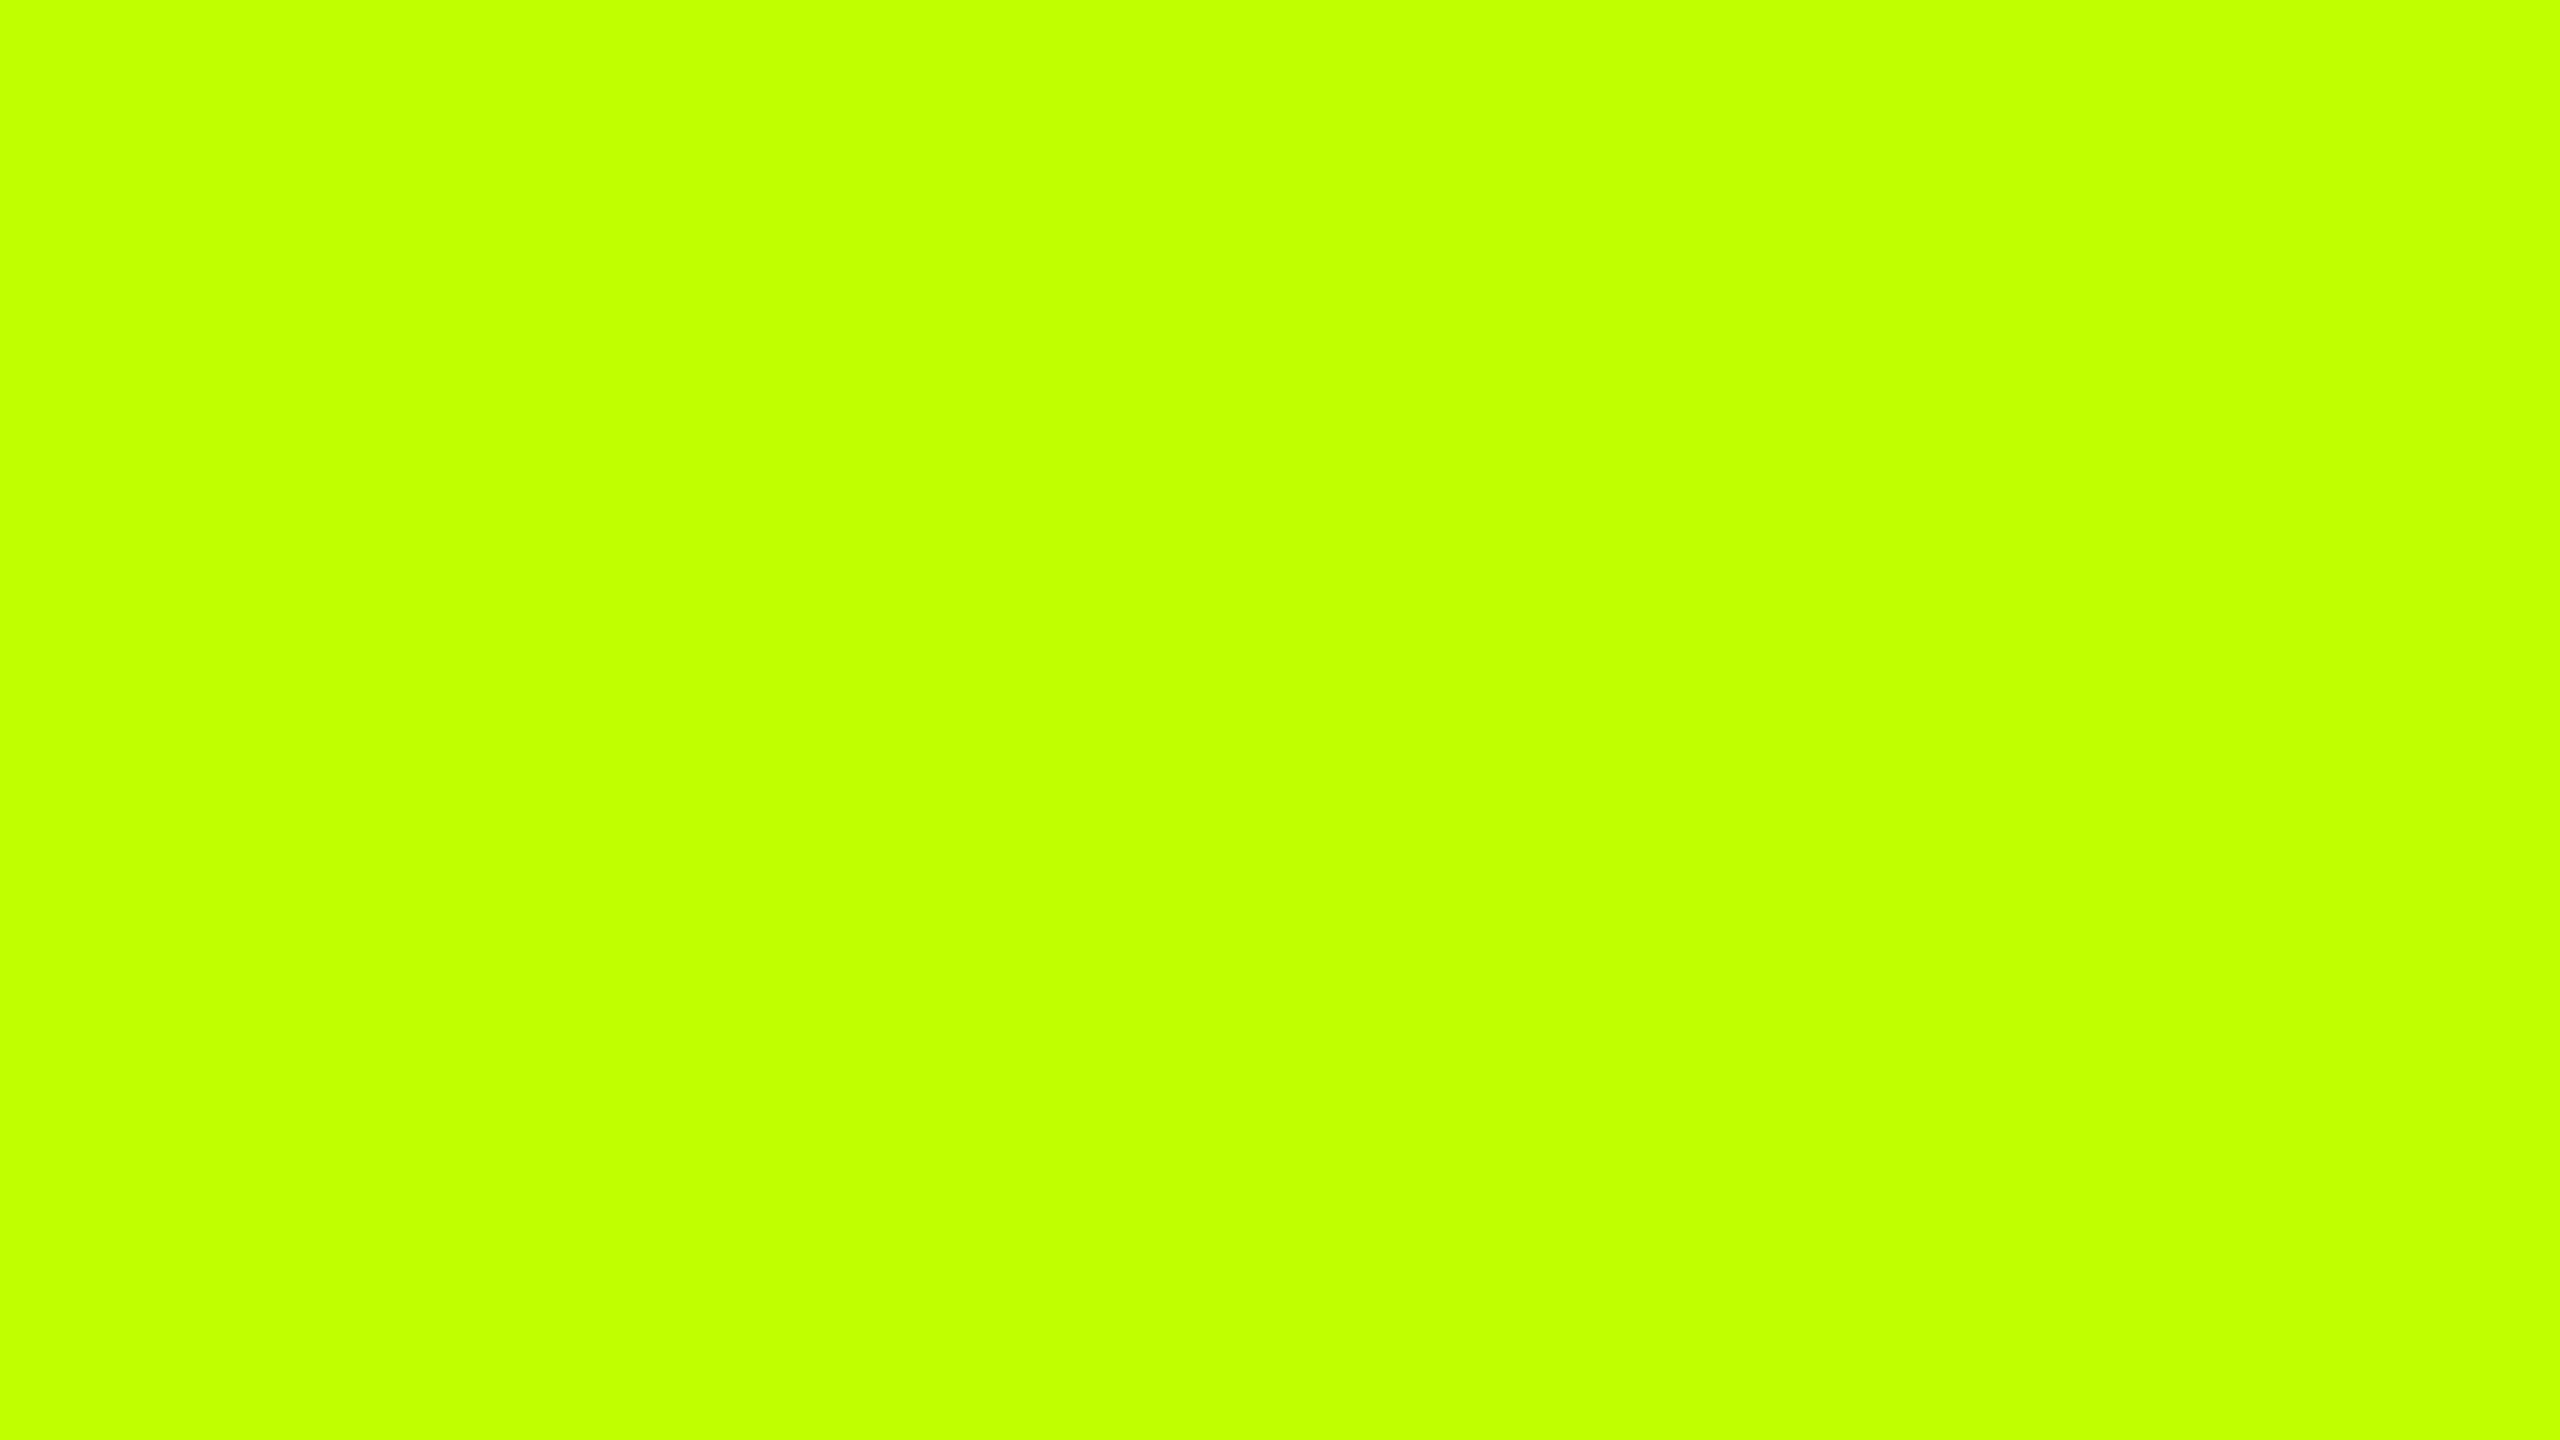 This Neon Green Desktop Wallpaper Is Easy Just Save The